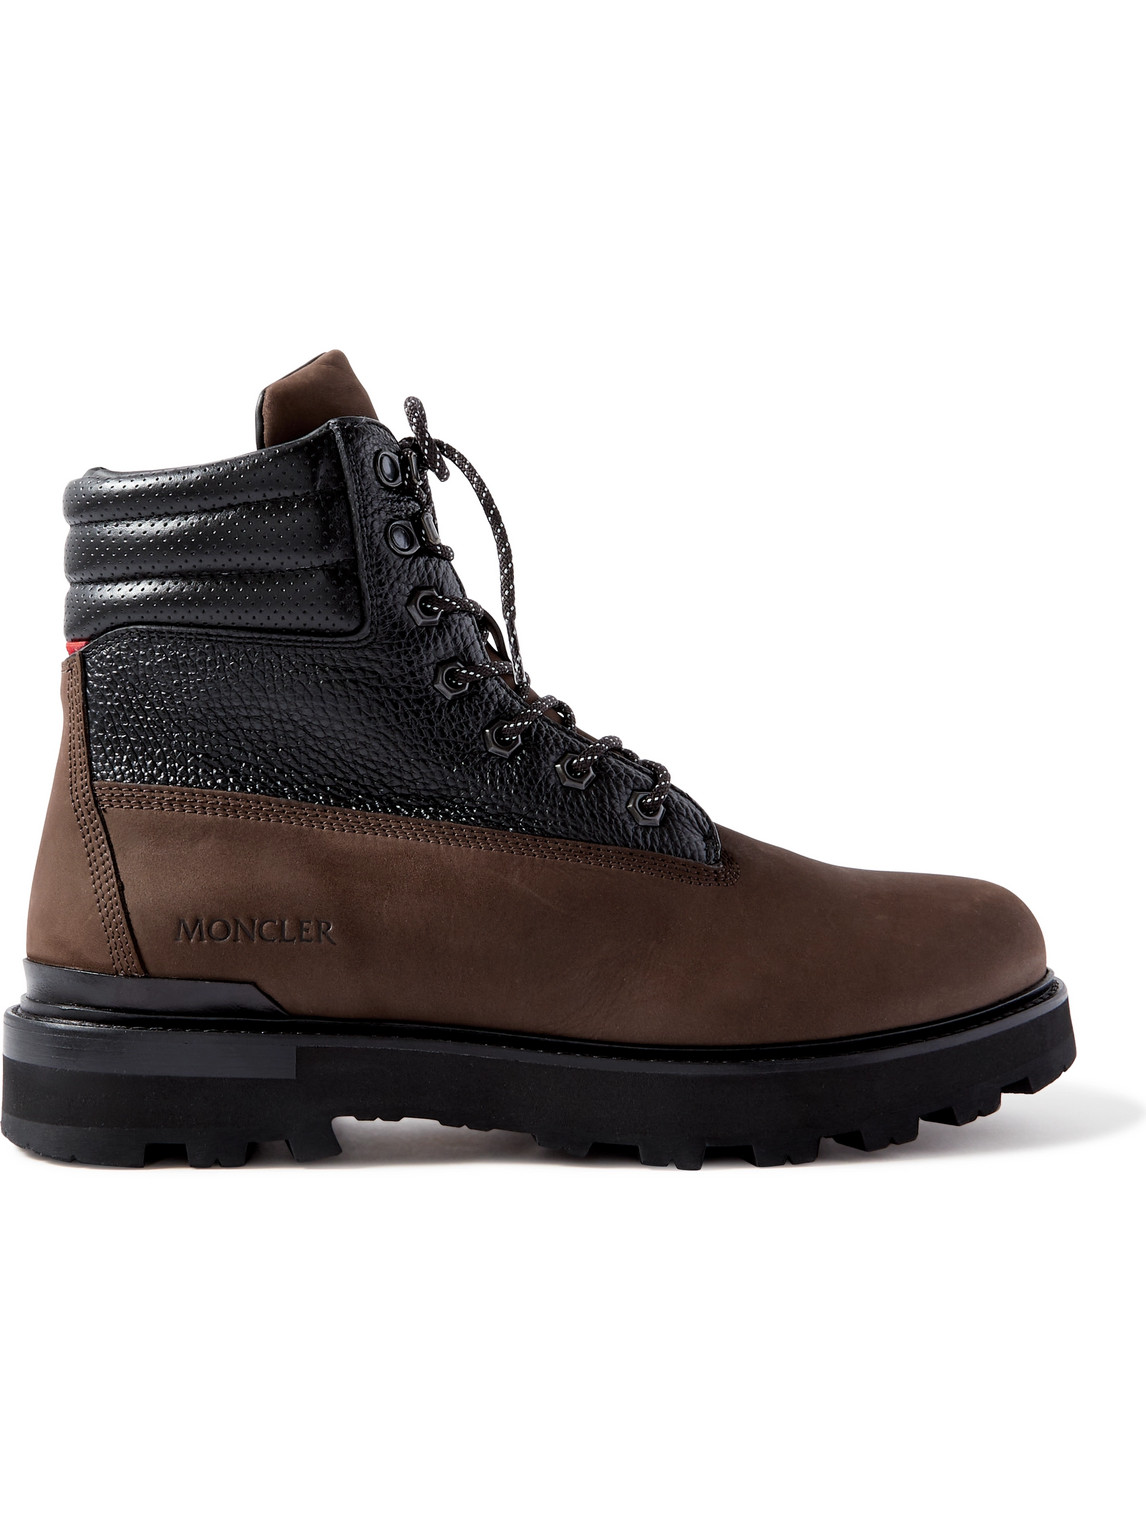 Moncler Peka Nubuck And Leather Hiking Boots In Brown Black